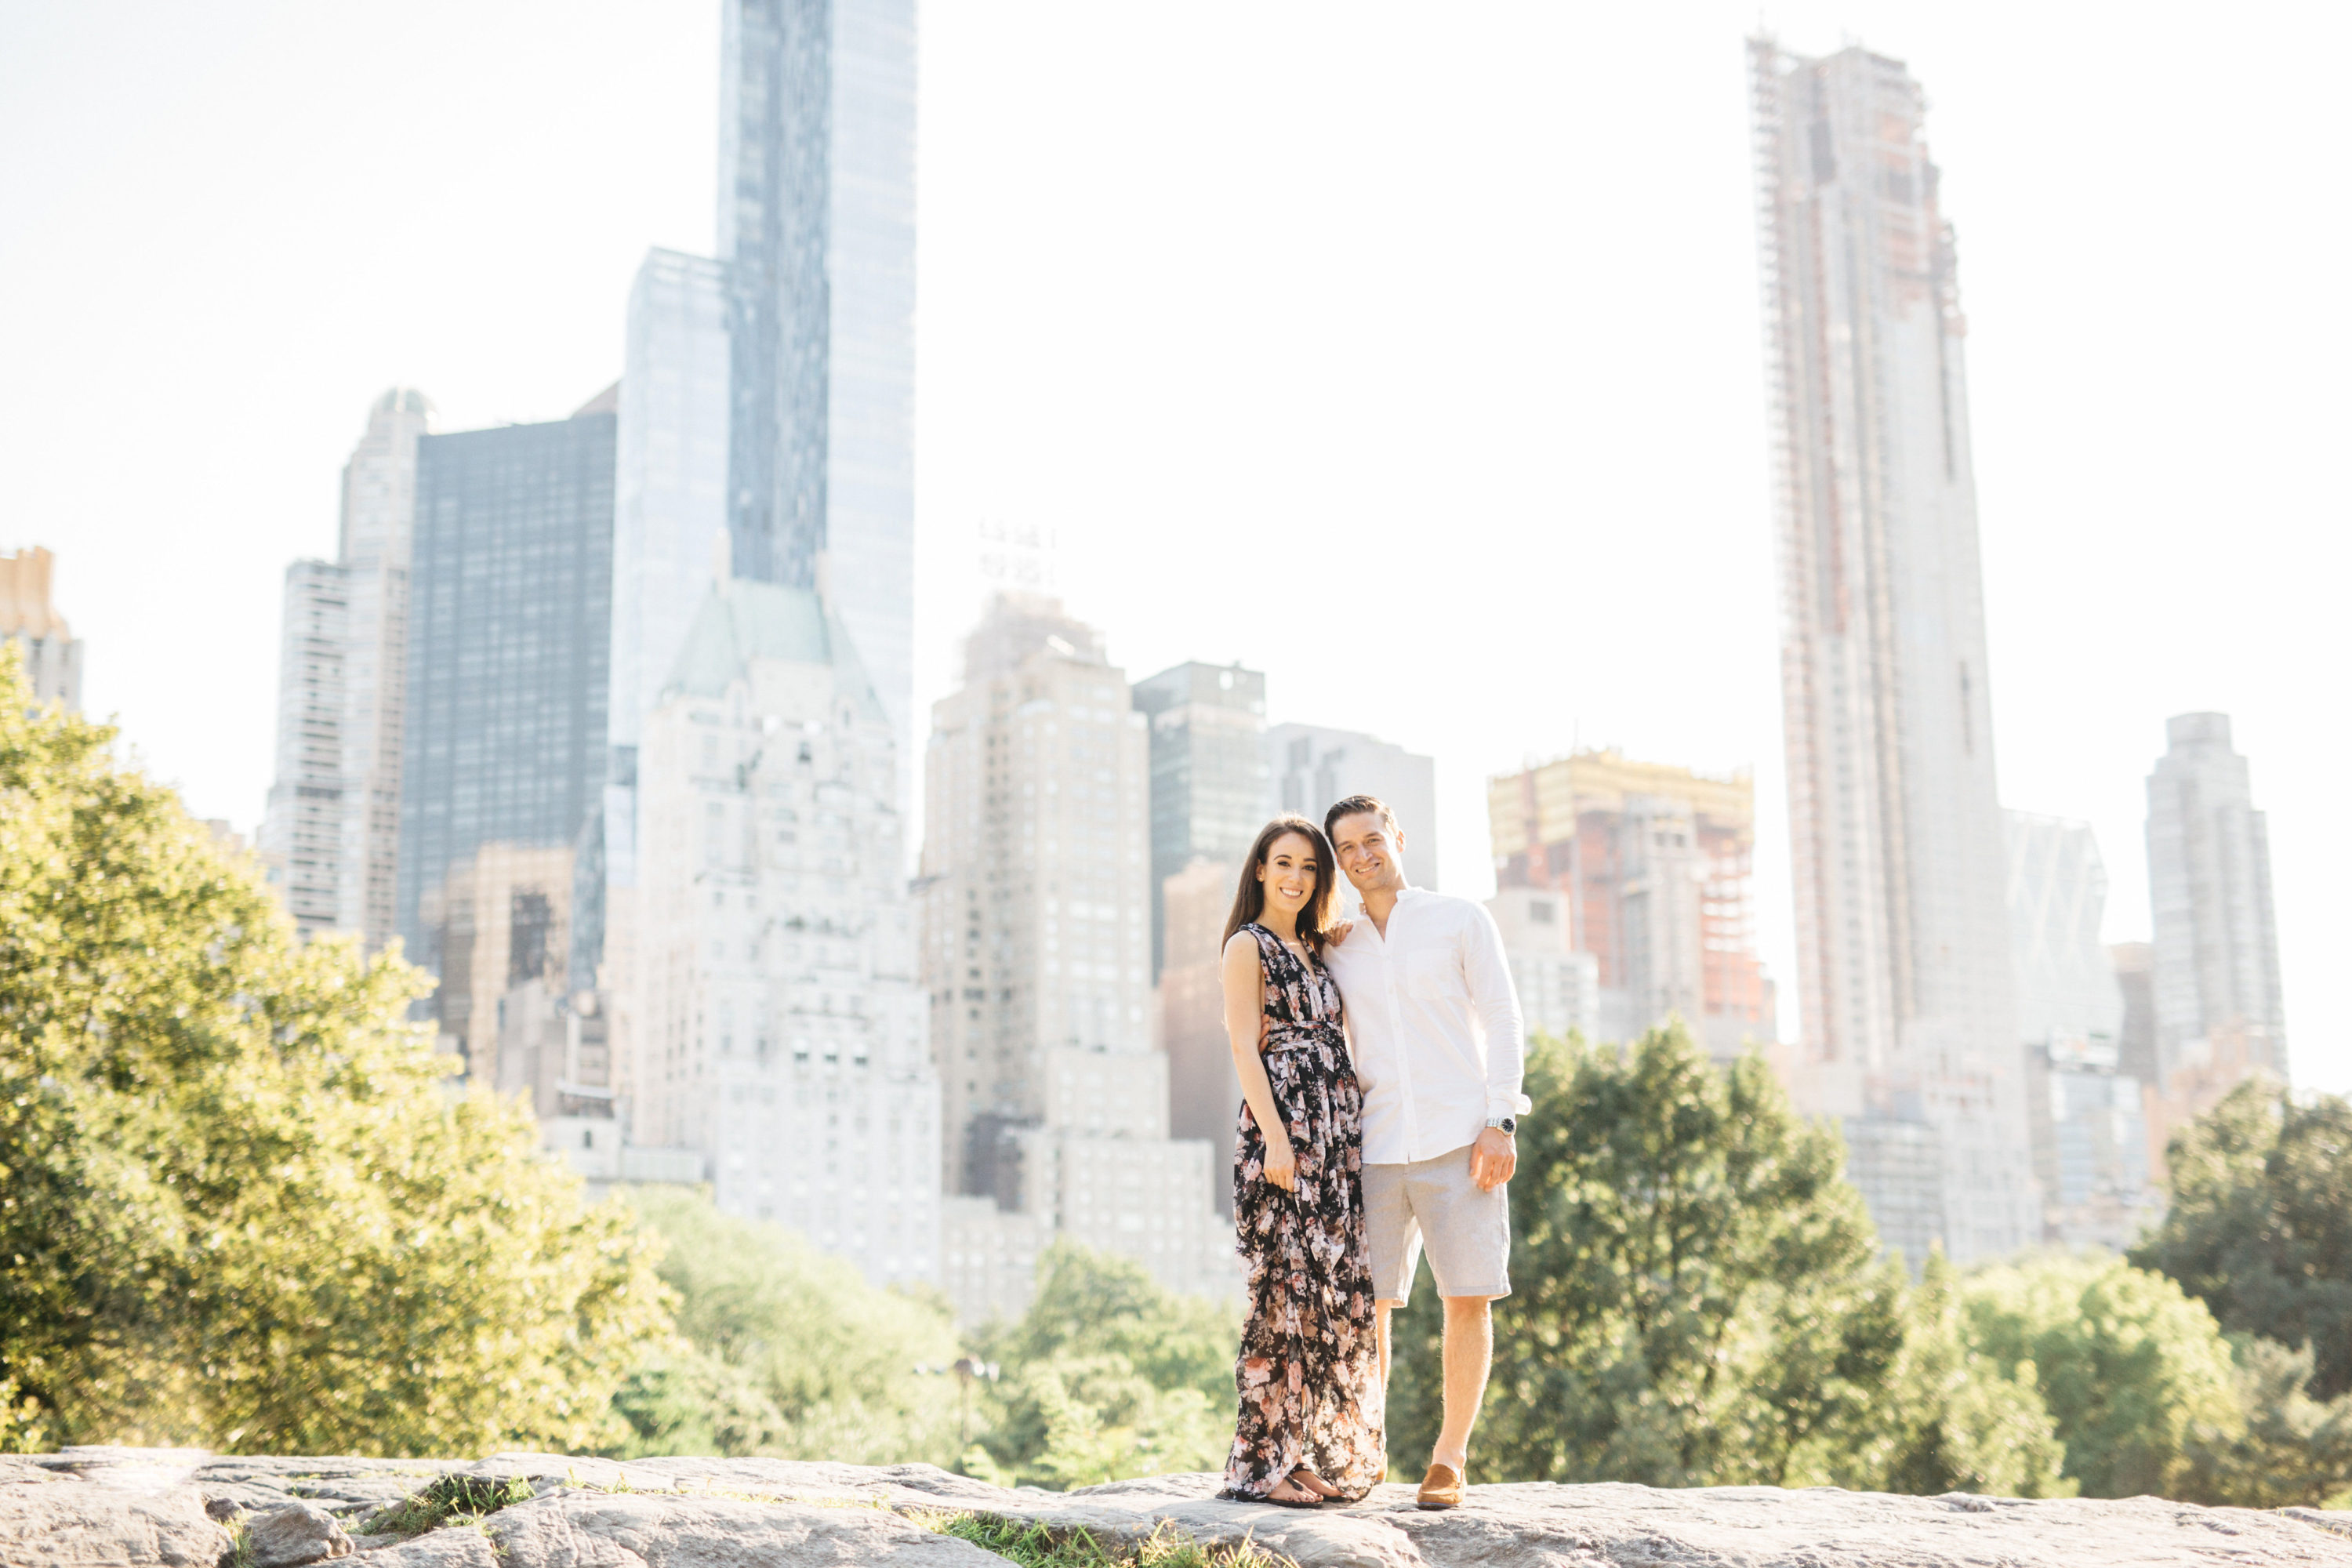 Couple looking at city in central park